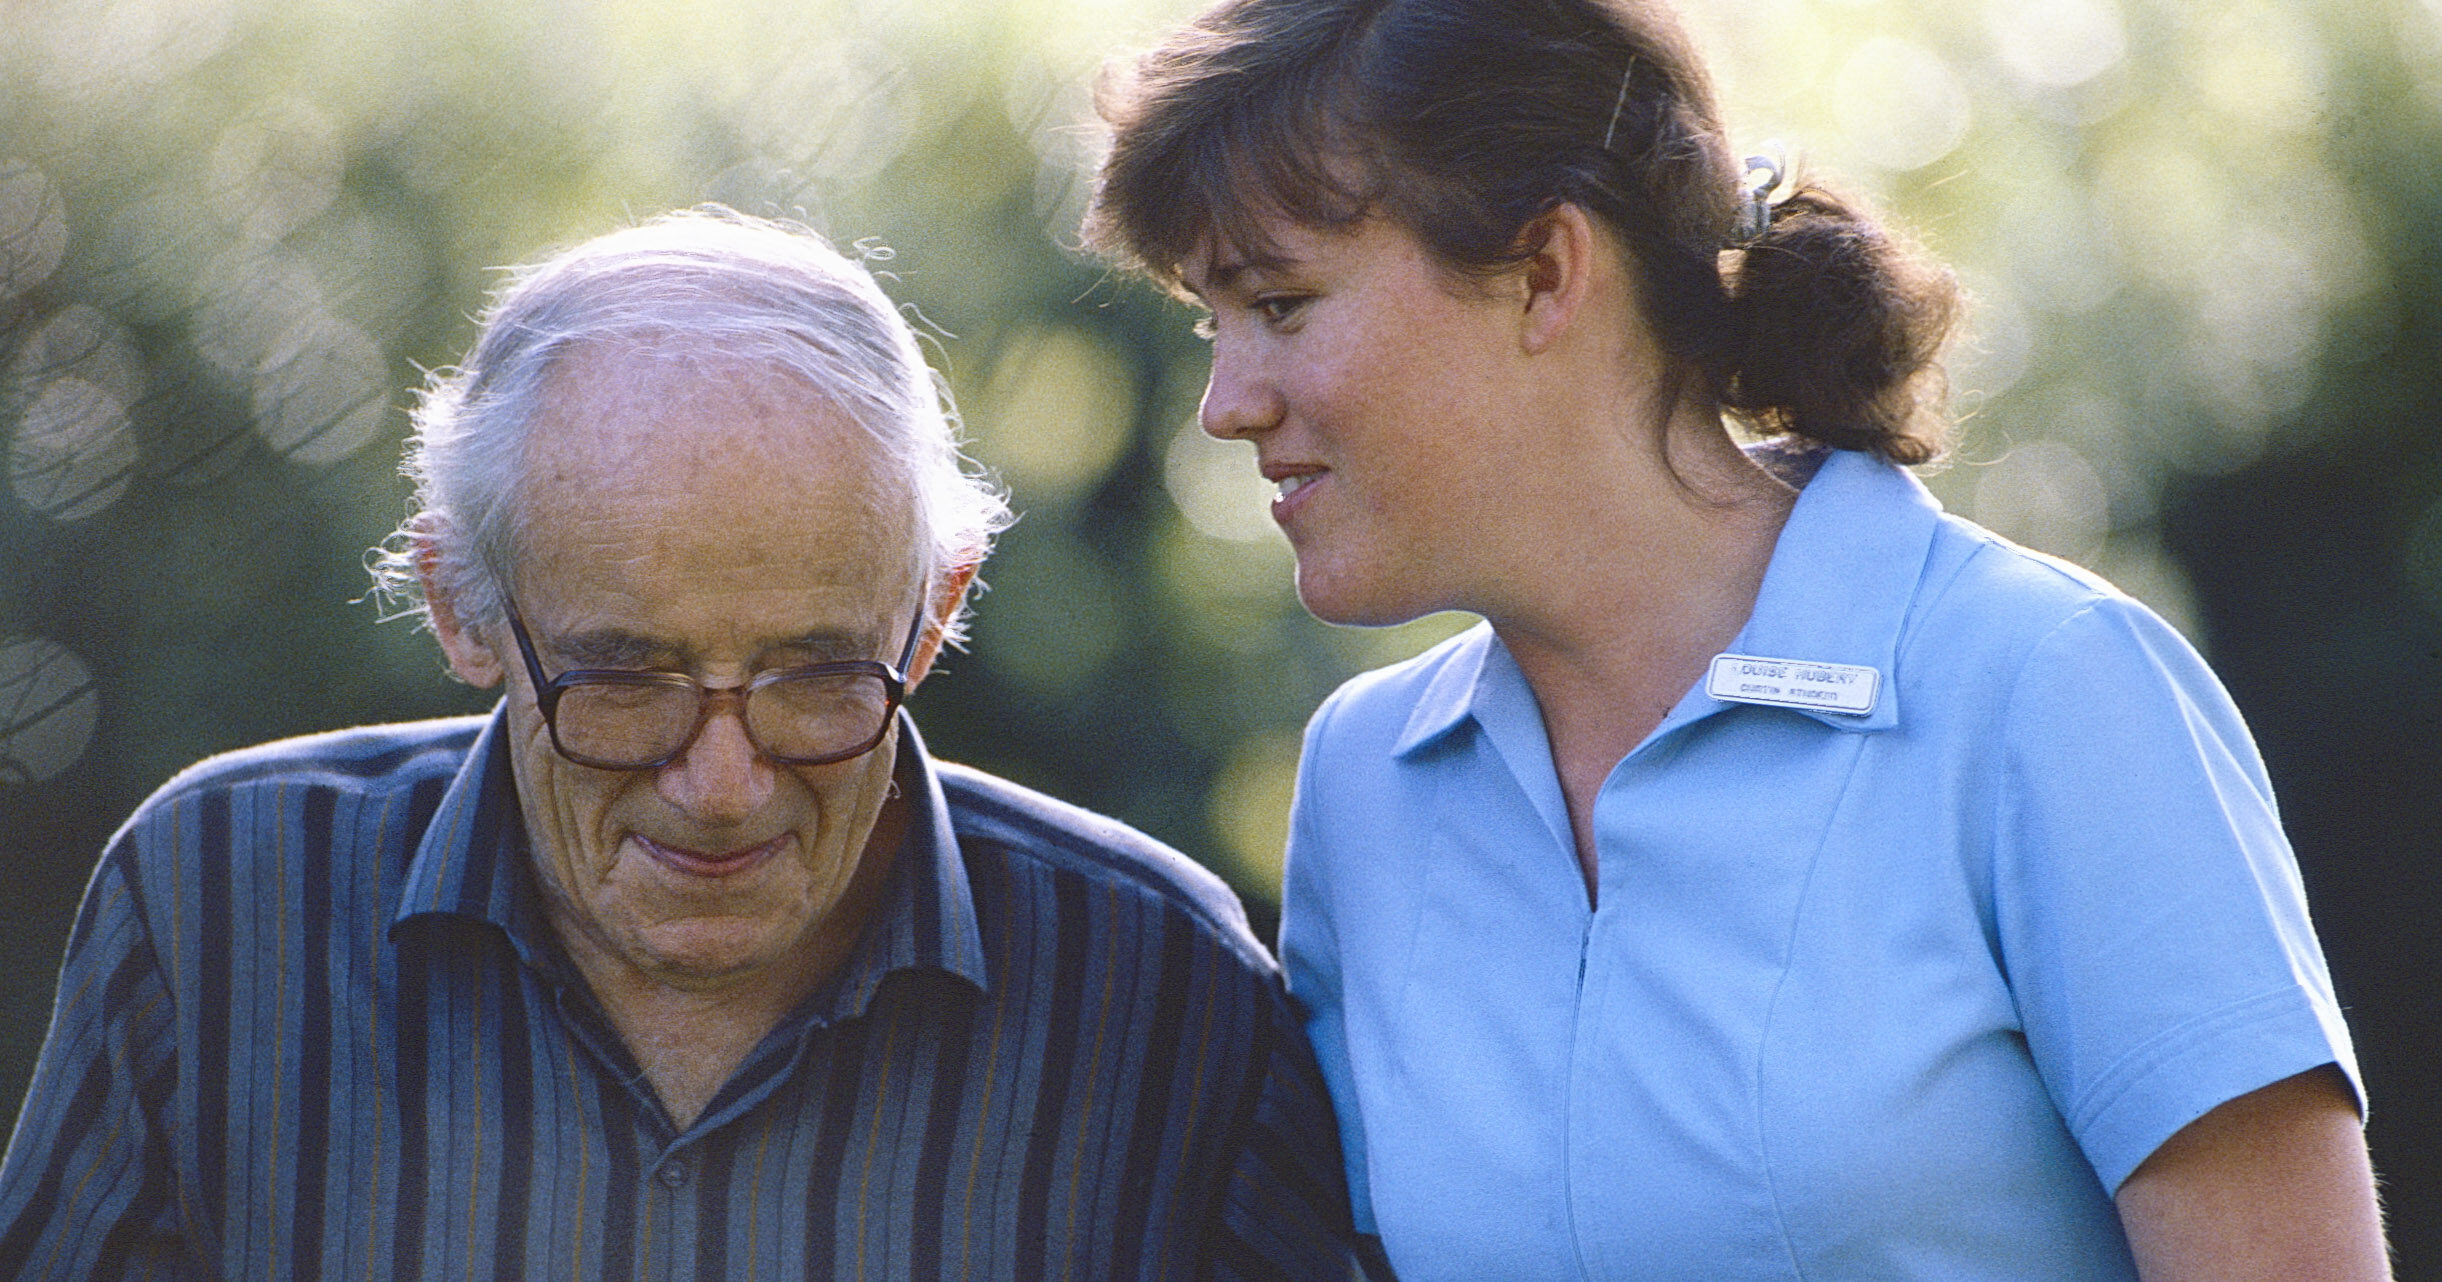 A nursing student with brown hair wearing a light blue nursing uniform holds the arm of an elderly man as they walk.